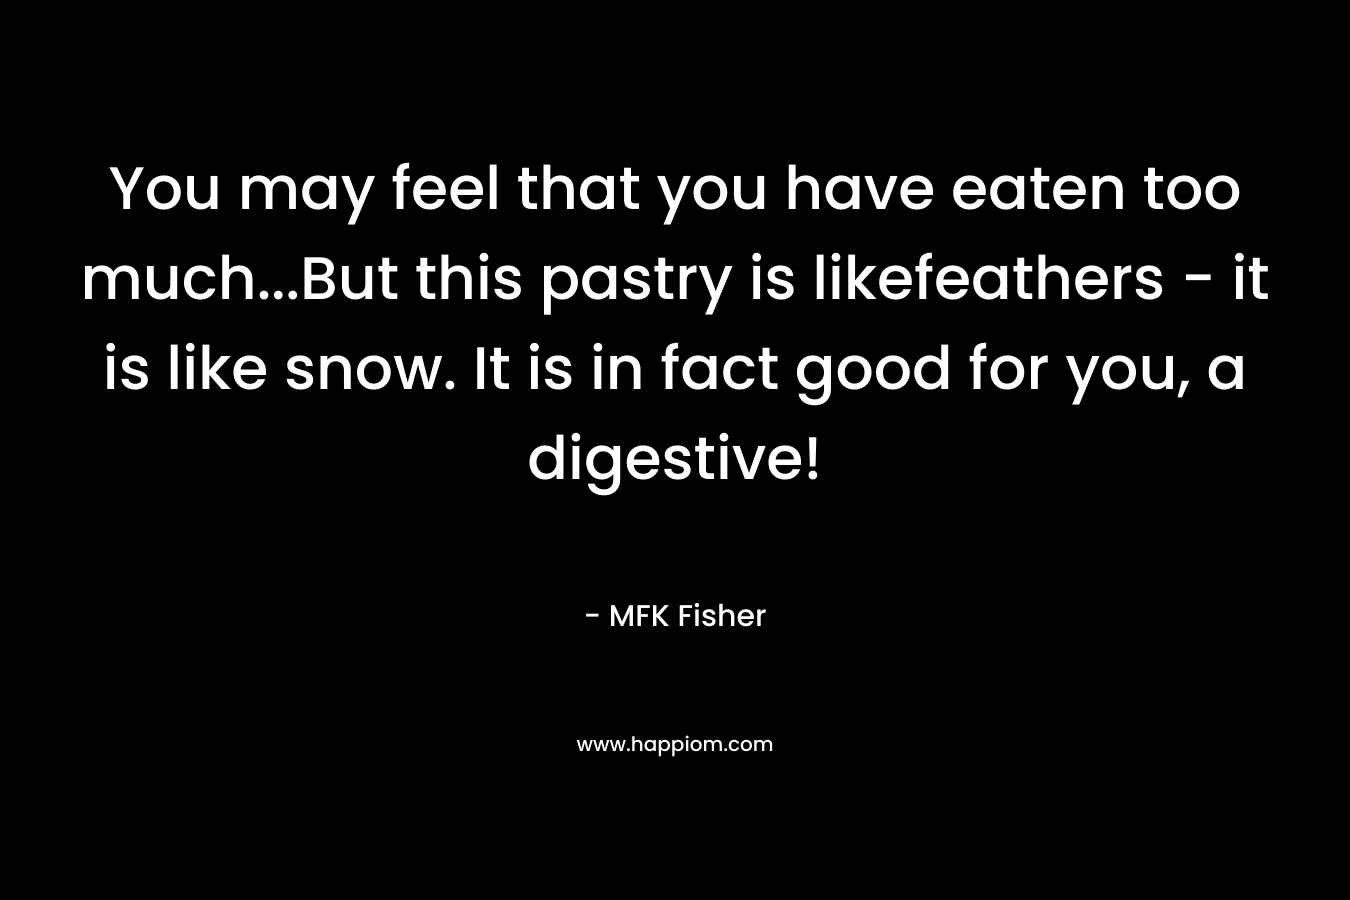 You may feel that you have eaten too much…But this pastry is likefeathers – it is like snow. It is in fact good for you, a digestive! – MFK Fisher